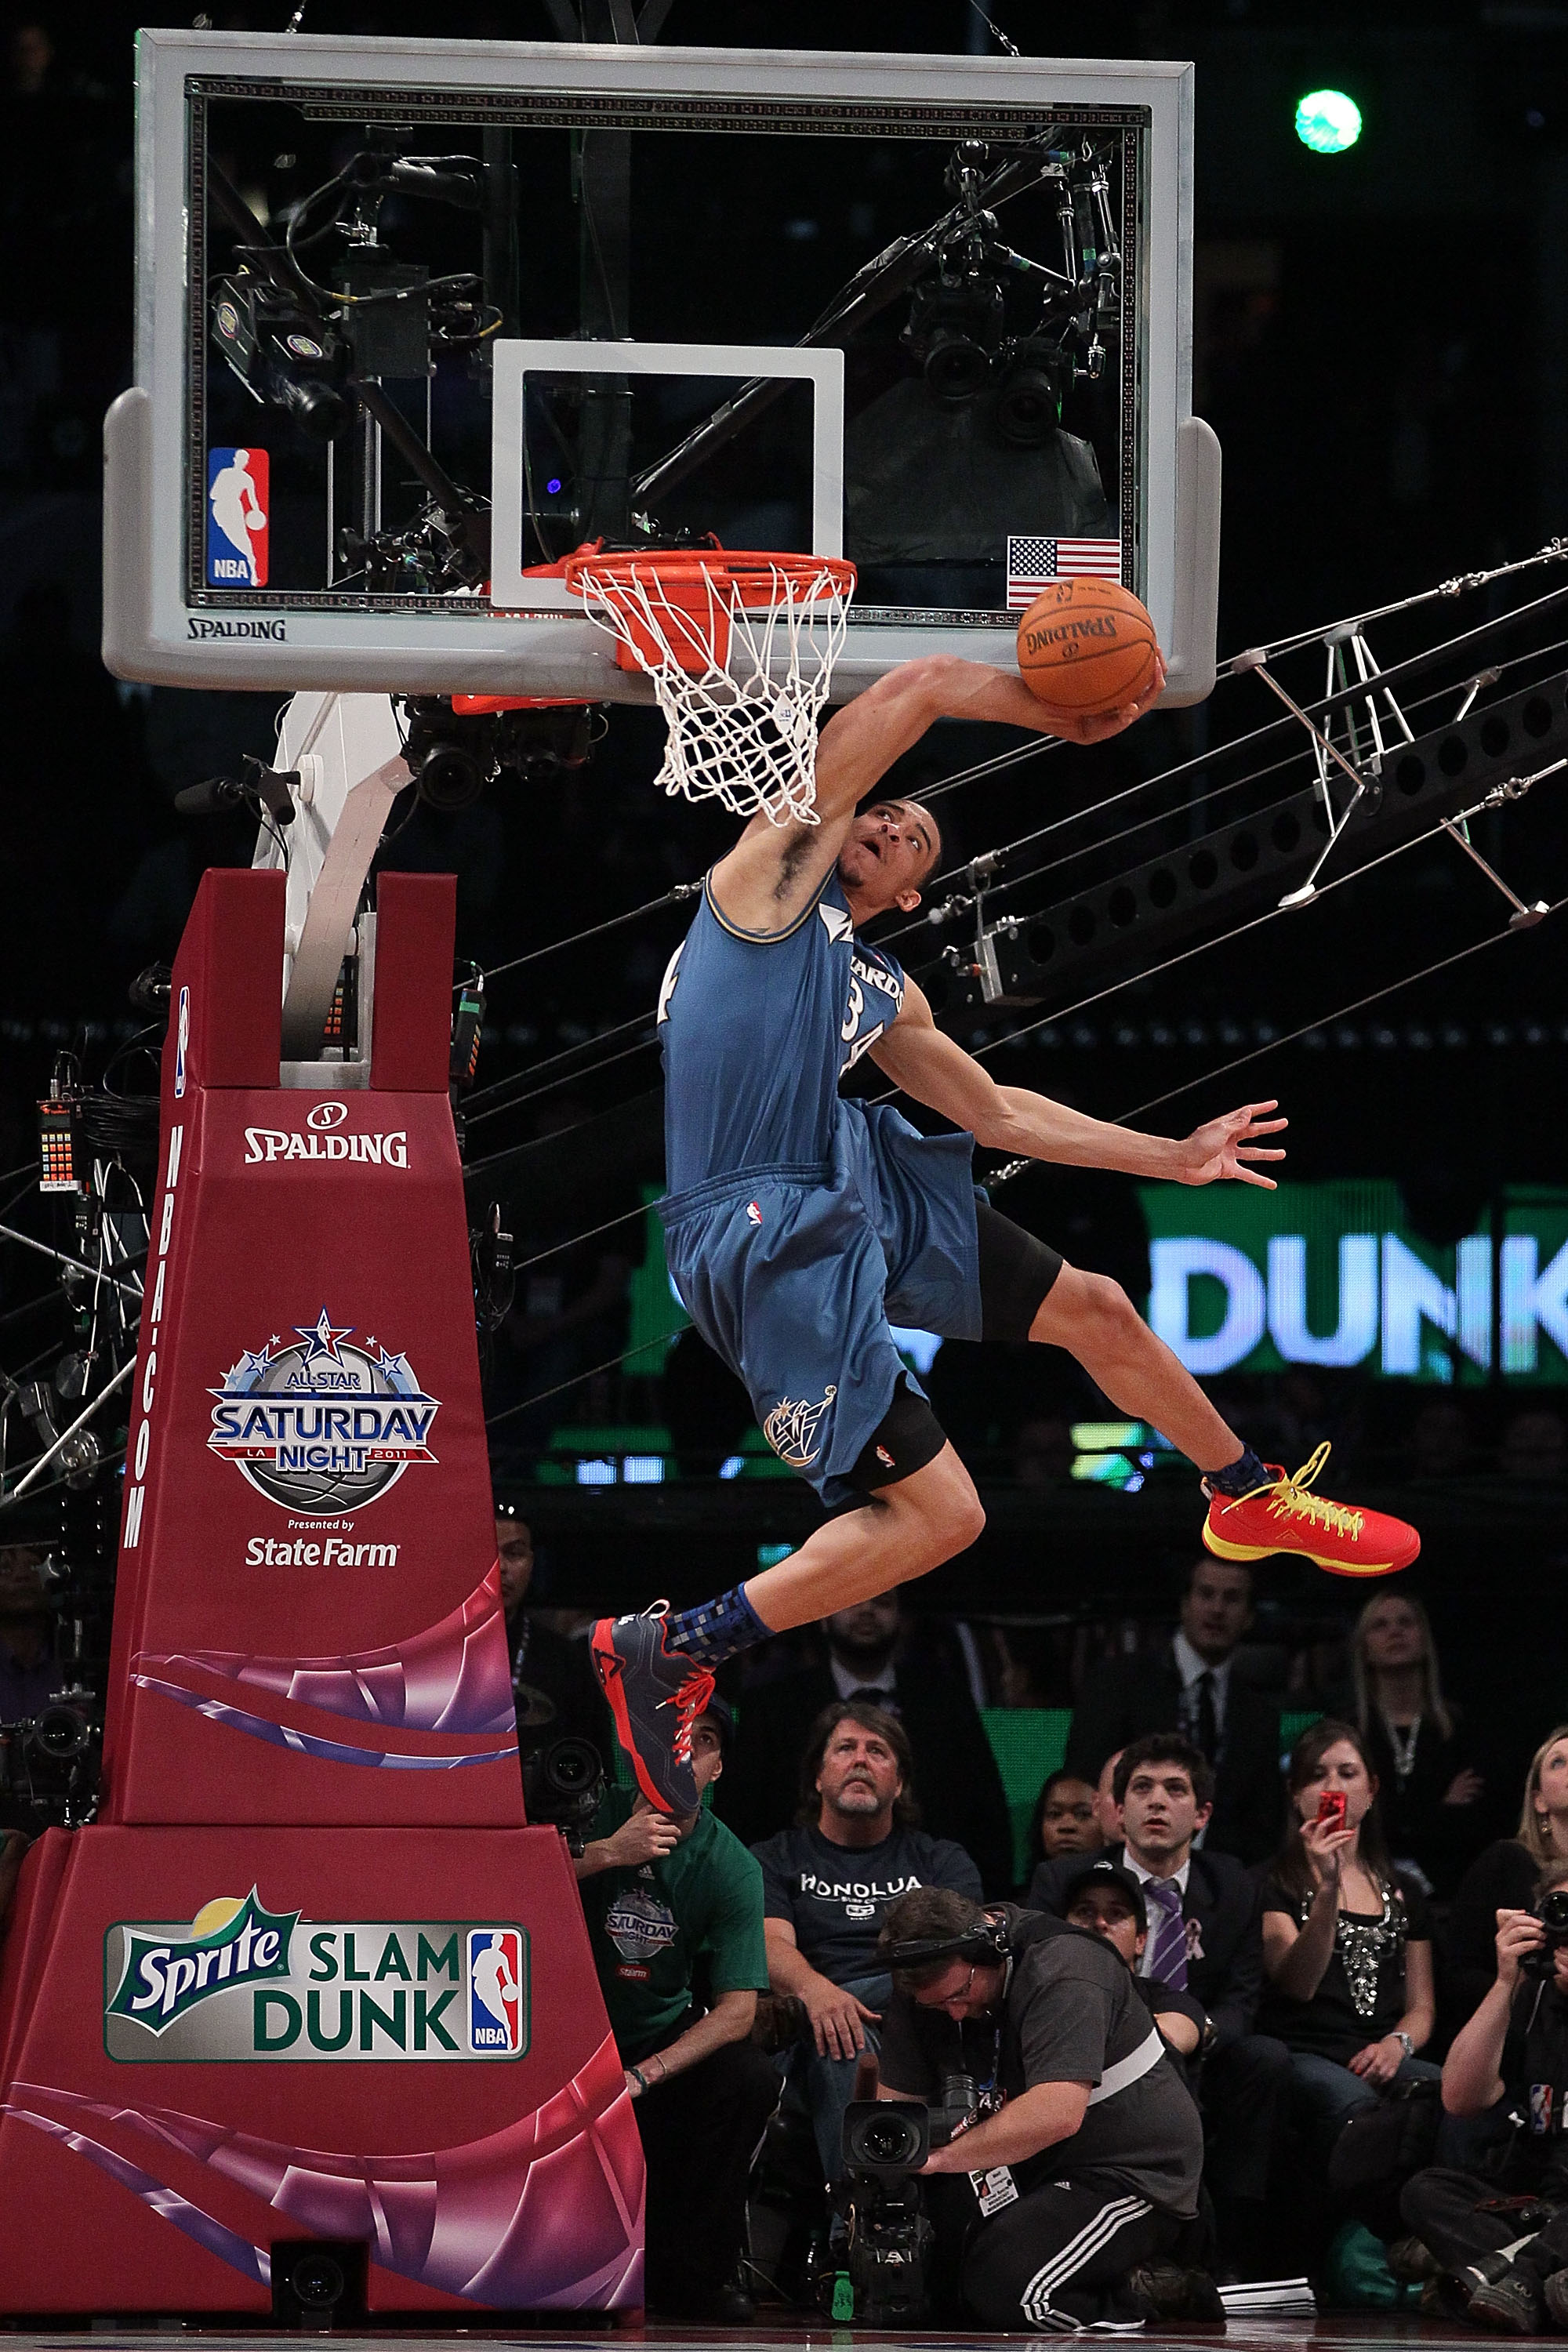 NBA All Star Saturday Night slam dunk competition, February 19